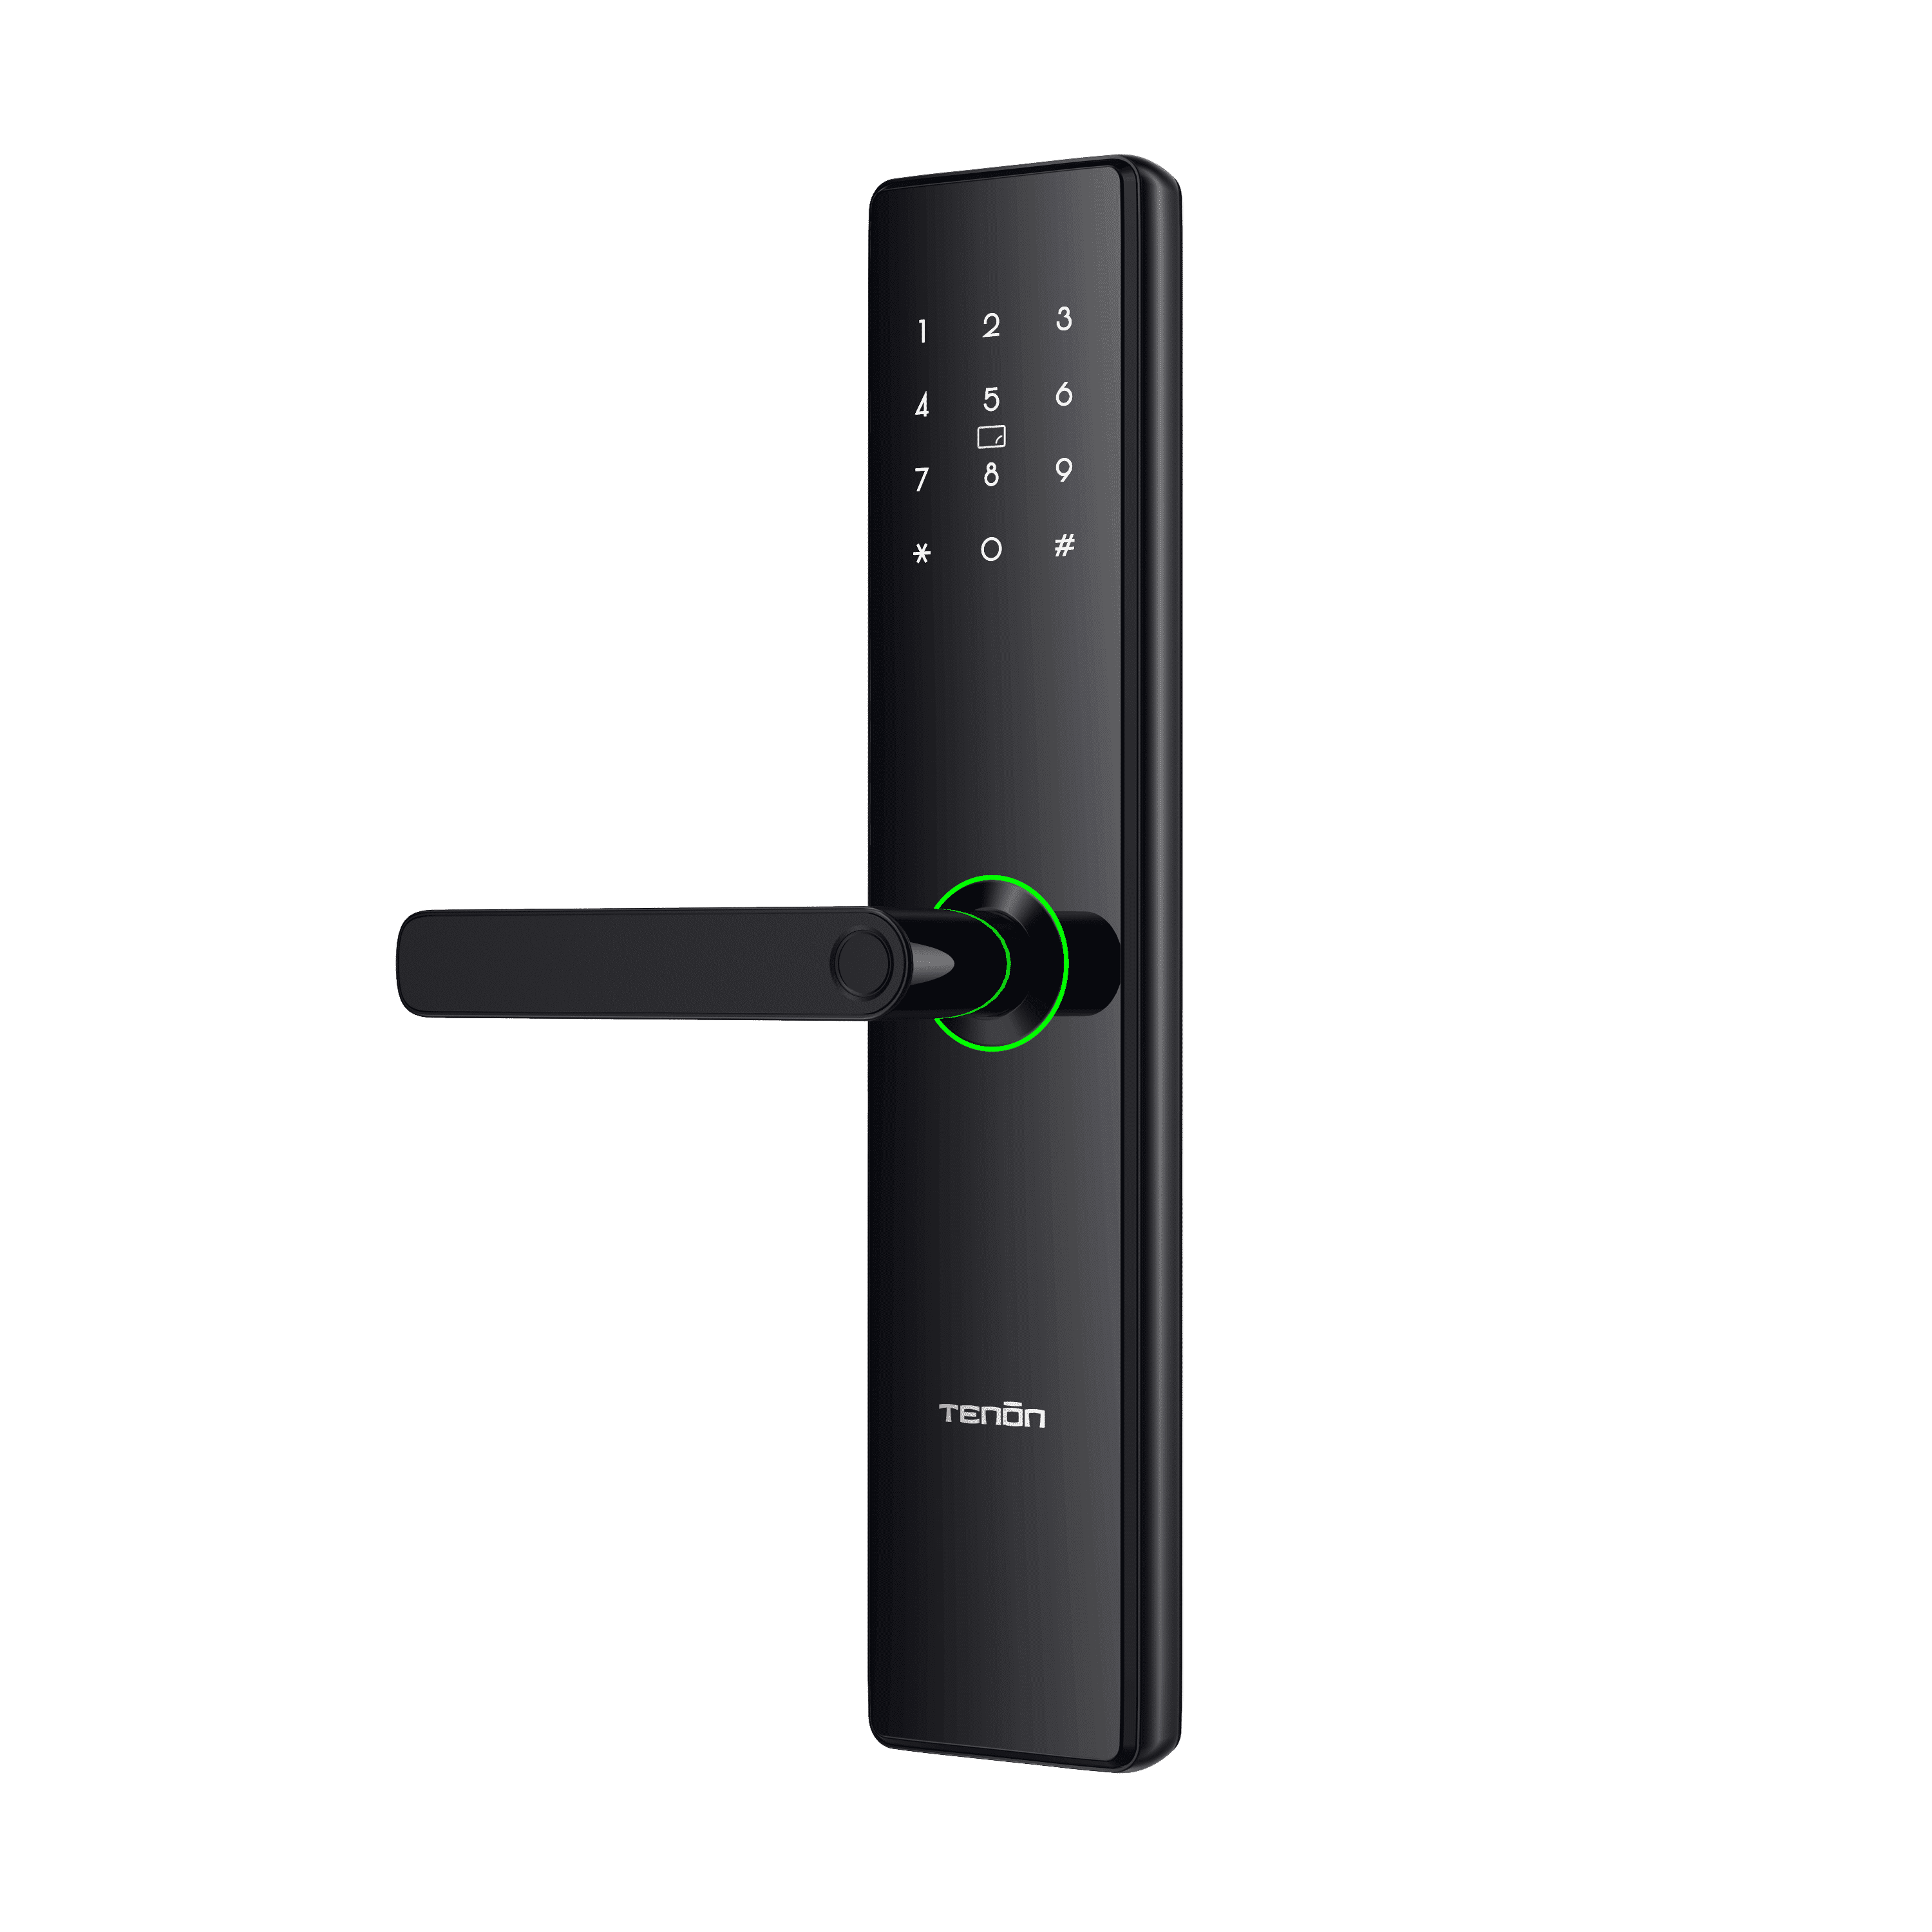 Remote Access Smart Touchpad Bluetooth-fähiges Smart Lock